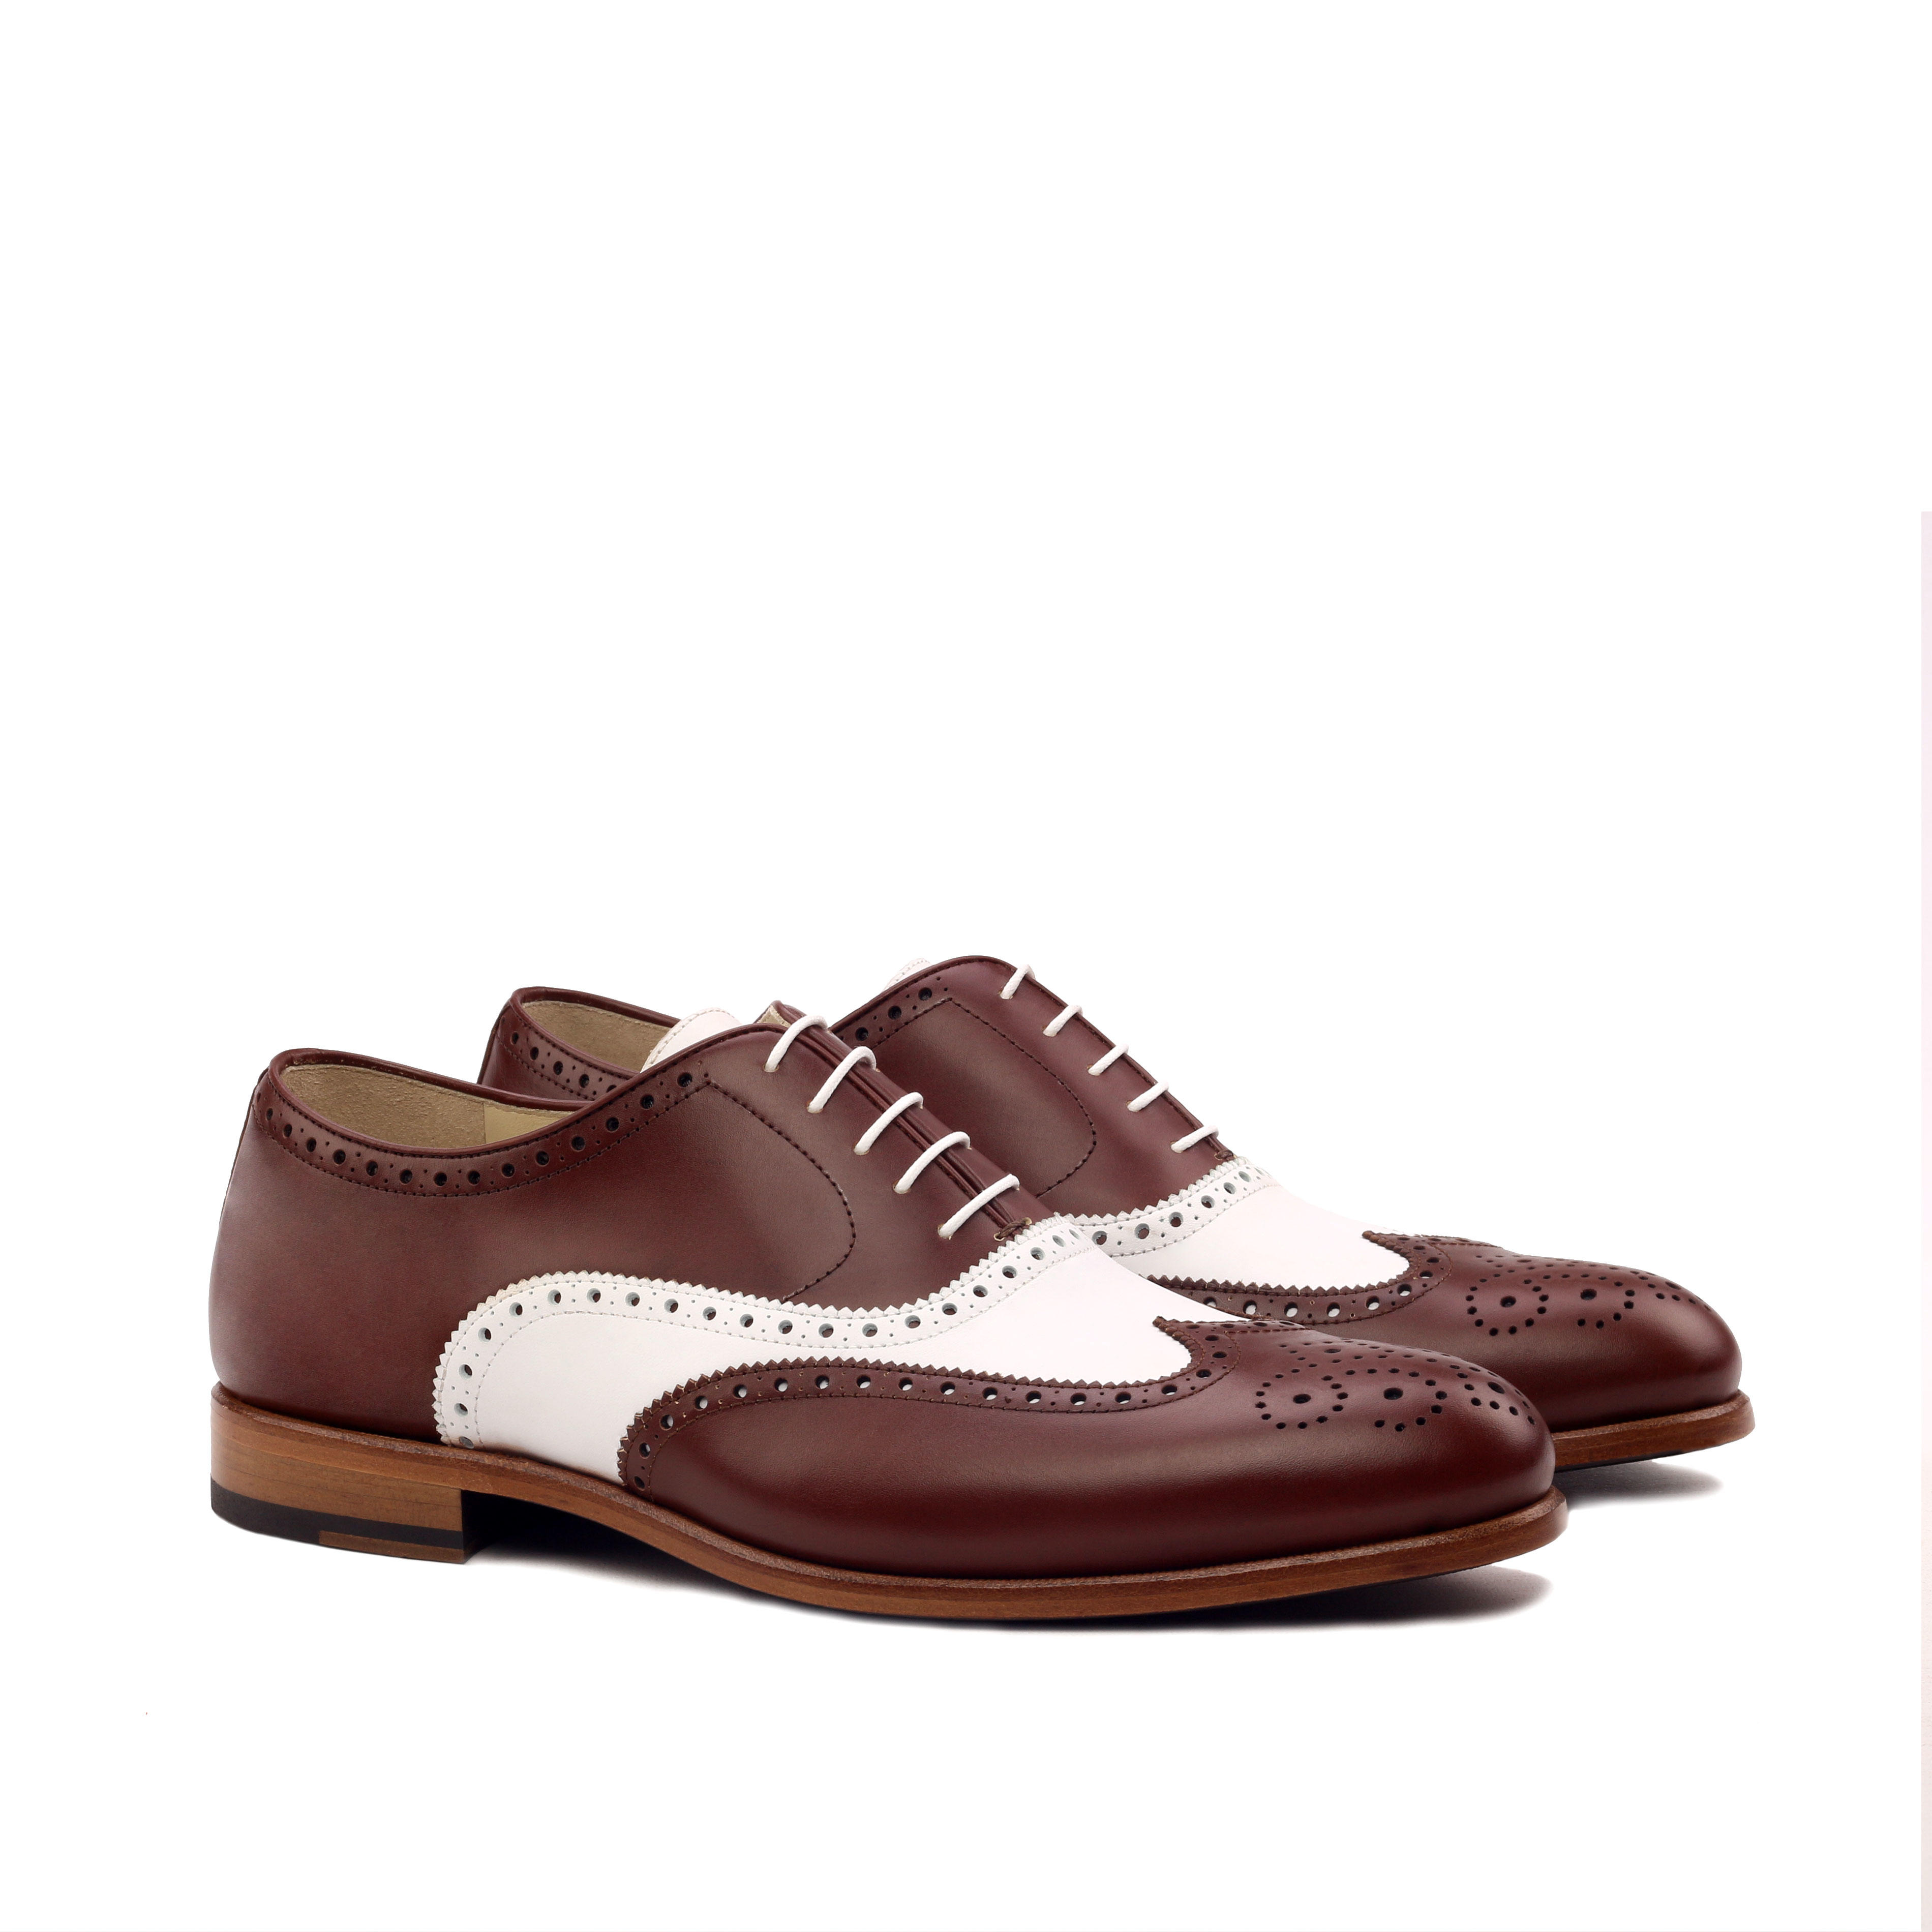 MANOR OF LONDON 'The Marylebone' Brown & White Calfskin Brogue Luxury Custom Initials Monogrammed Front Side View